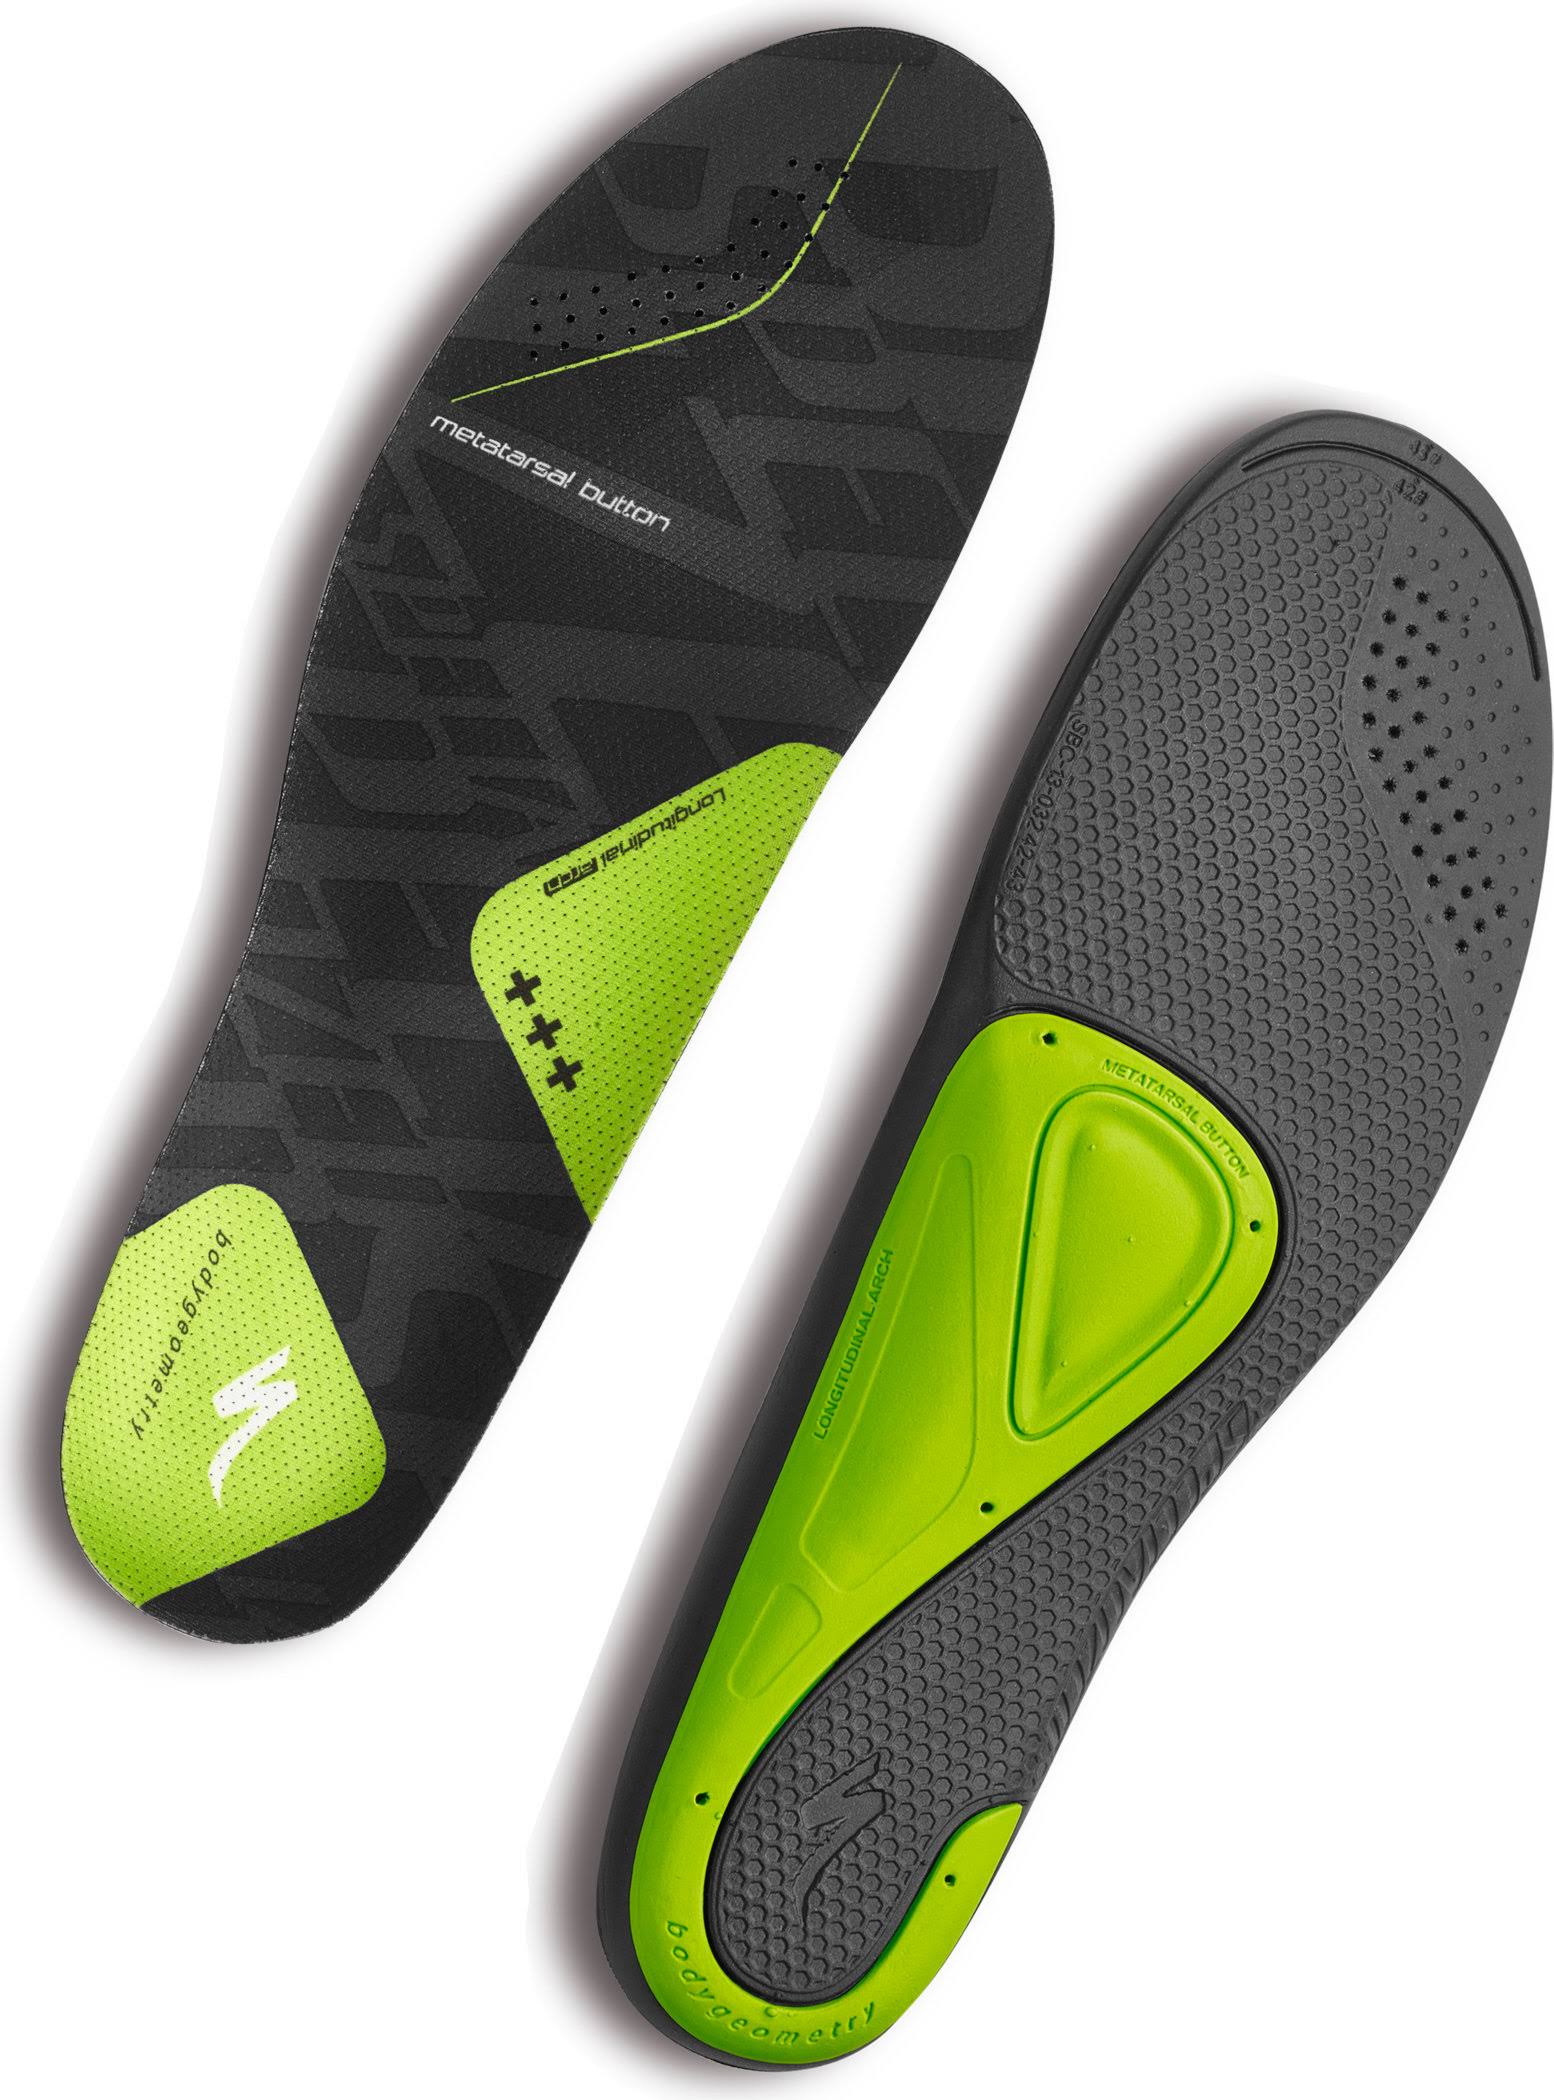 Specialized Bg Sl Foot Bed Insole - Green